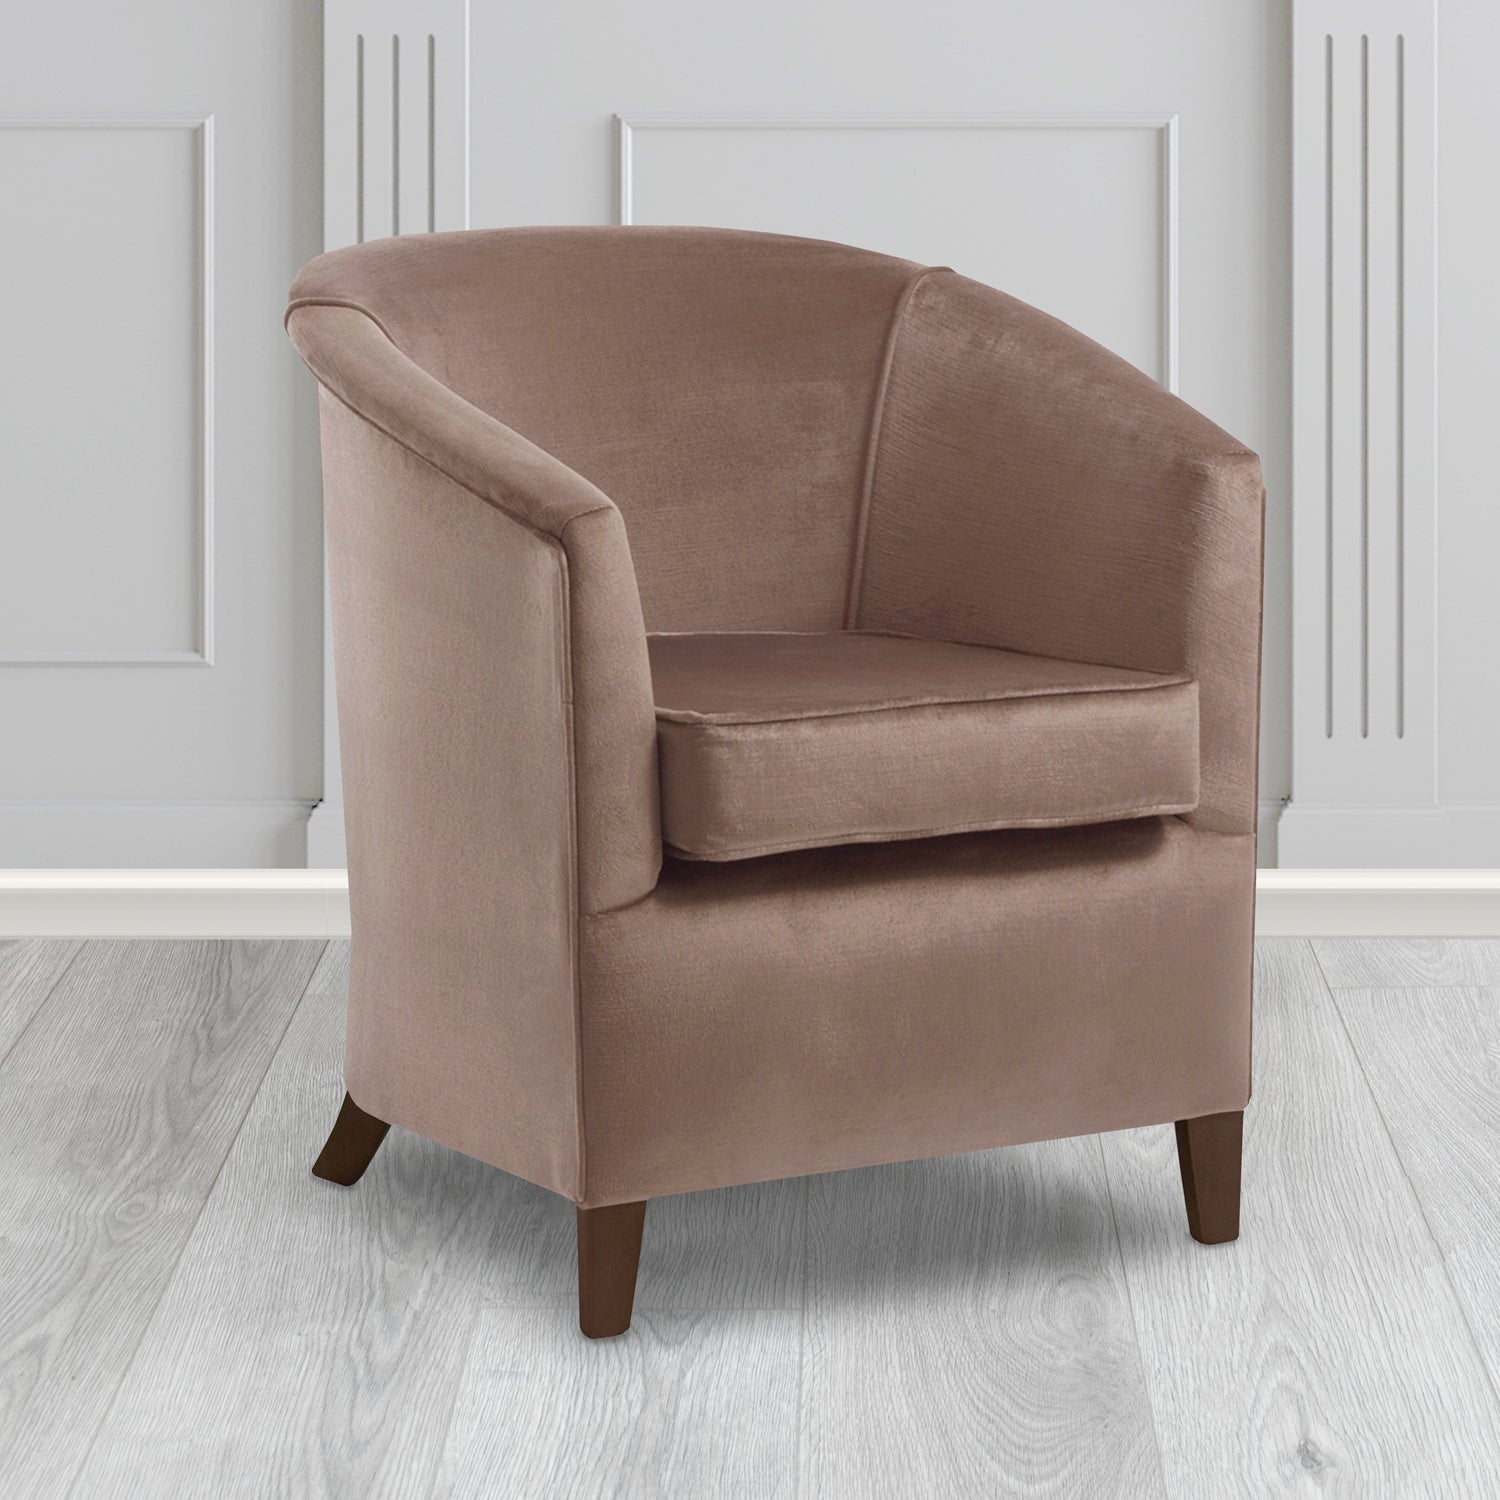 Jasmine Tub Chair in Noble 708 Truffle Crib 5 Velvet Fabric - Water Resistant - The Tub Chair Shop